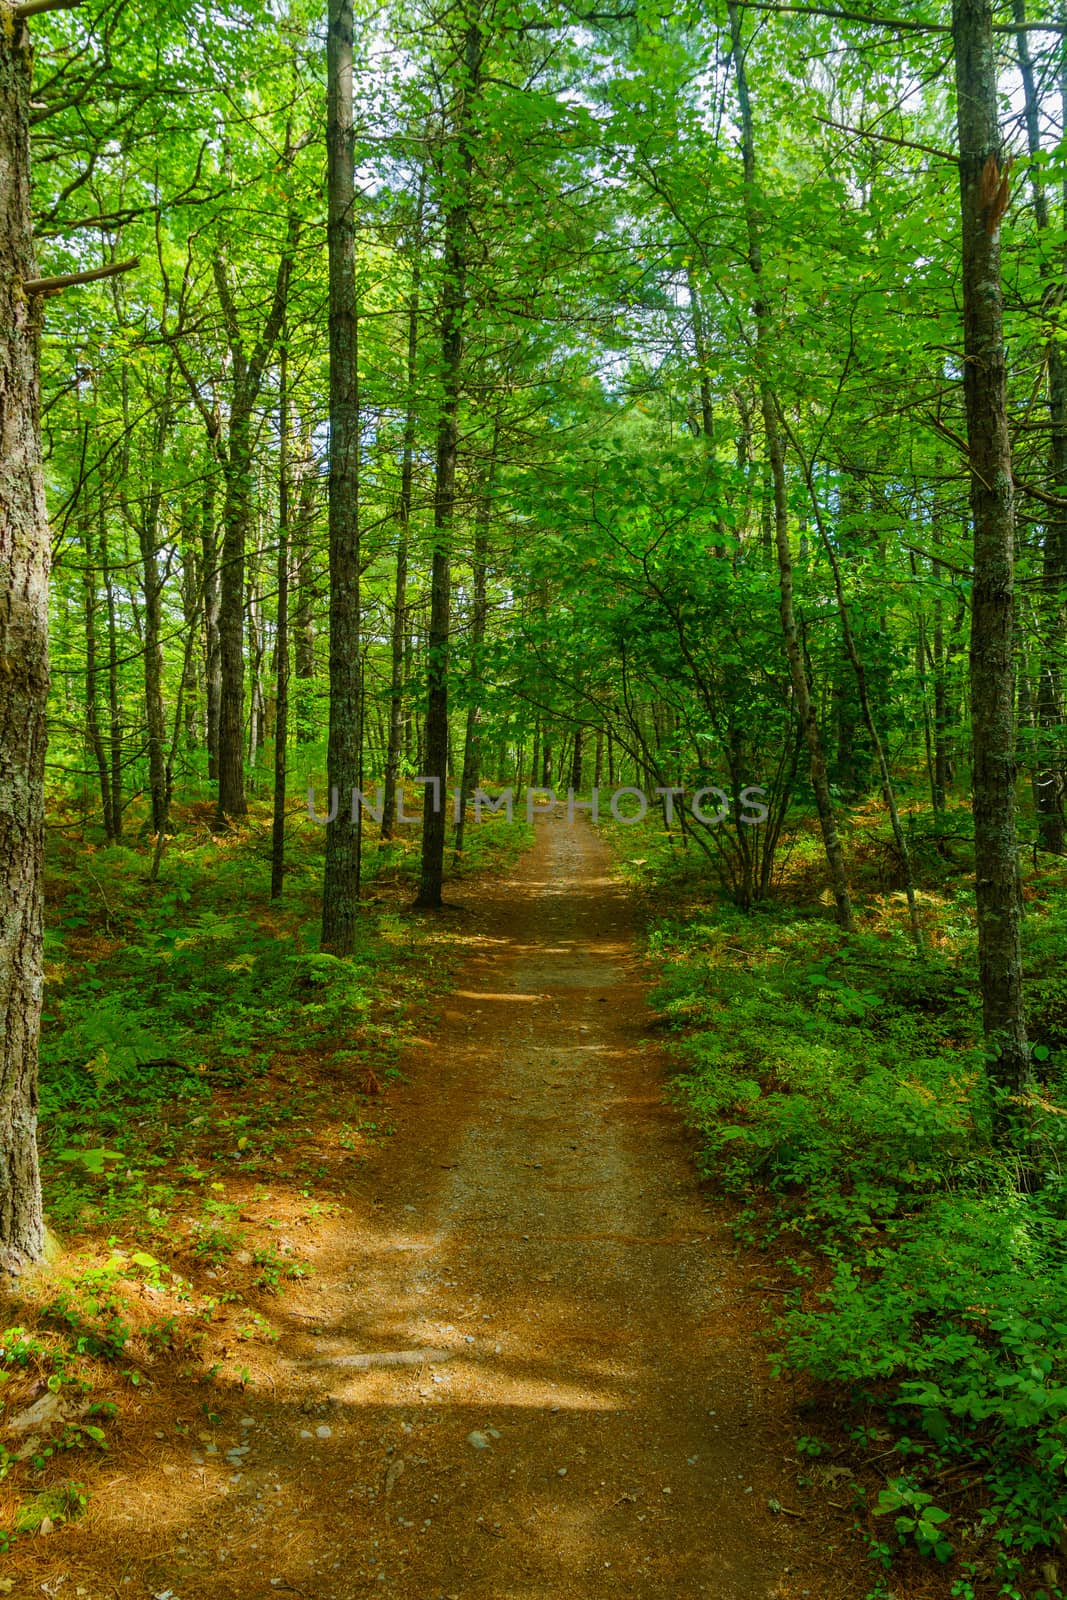 Footpath in a forest, in Kejimkujik National Park by RnDmS